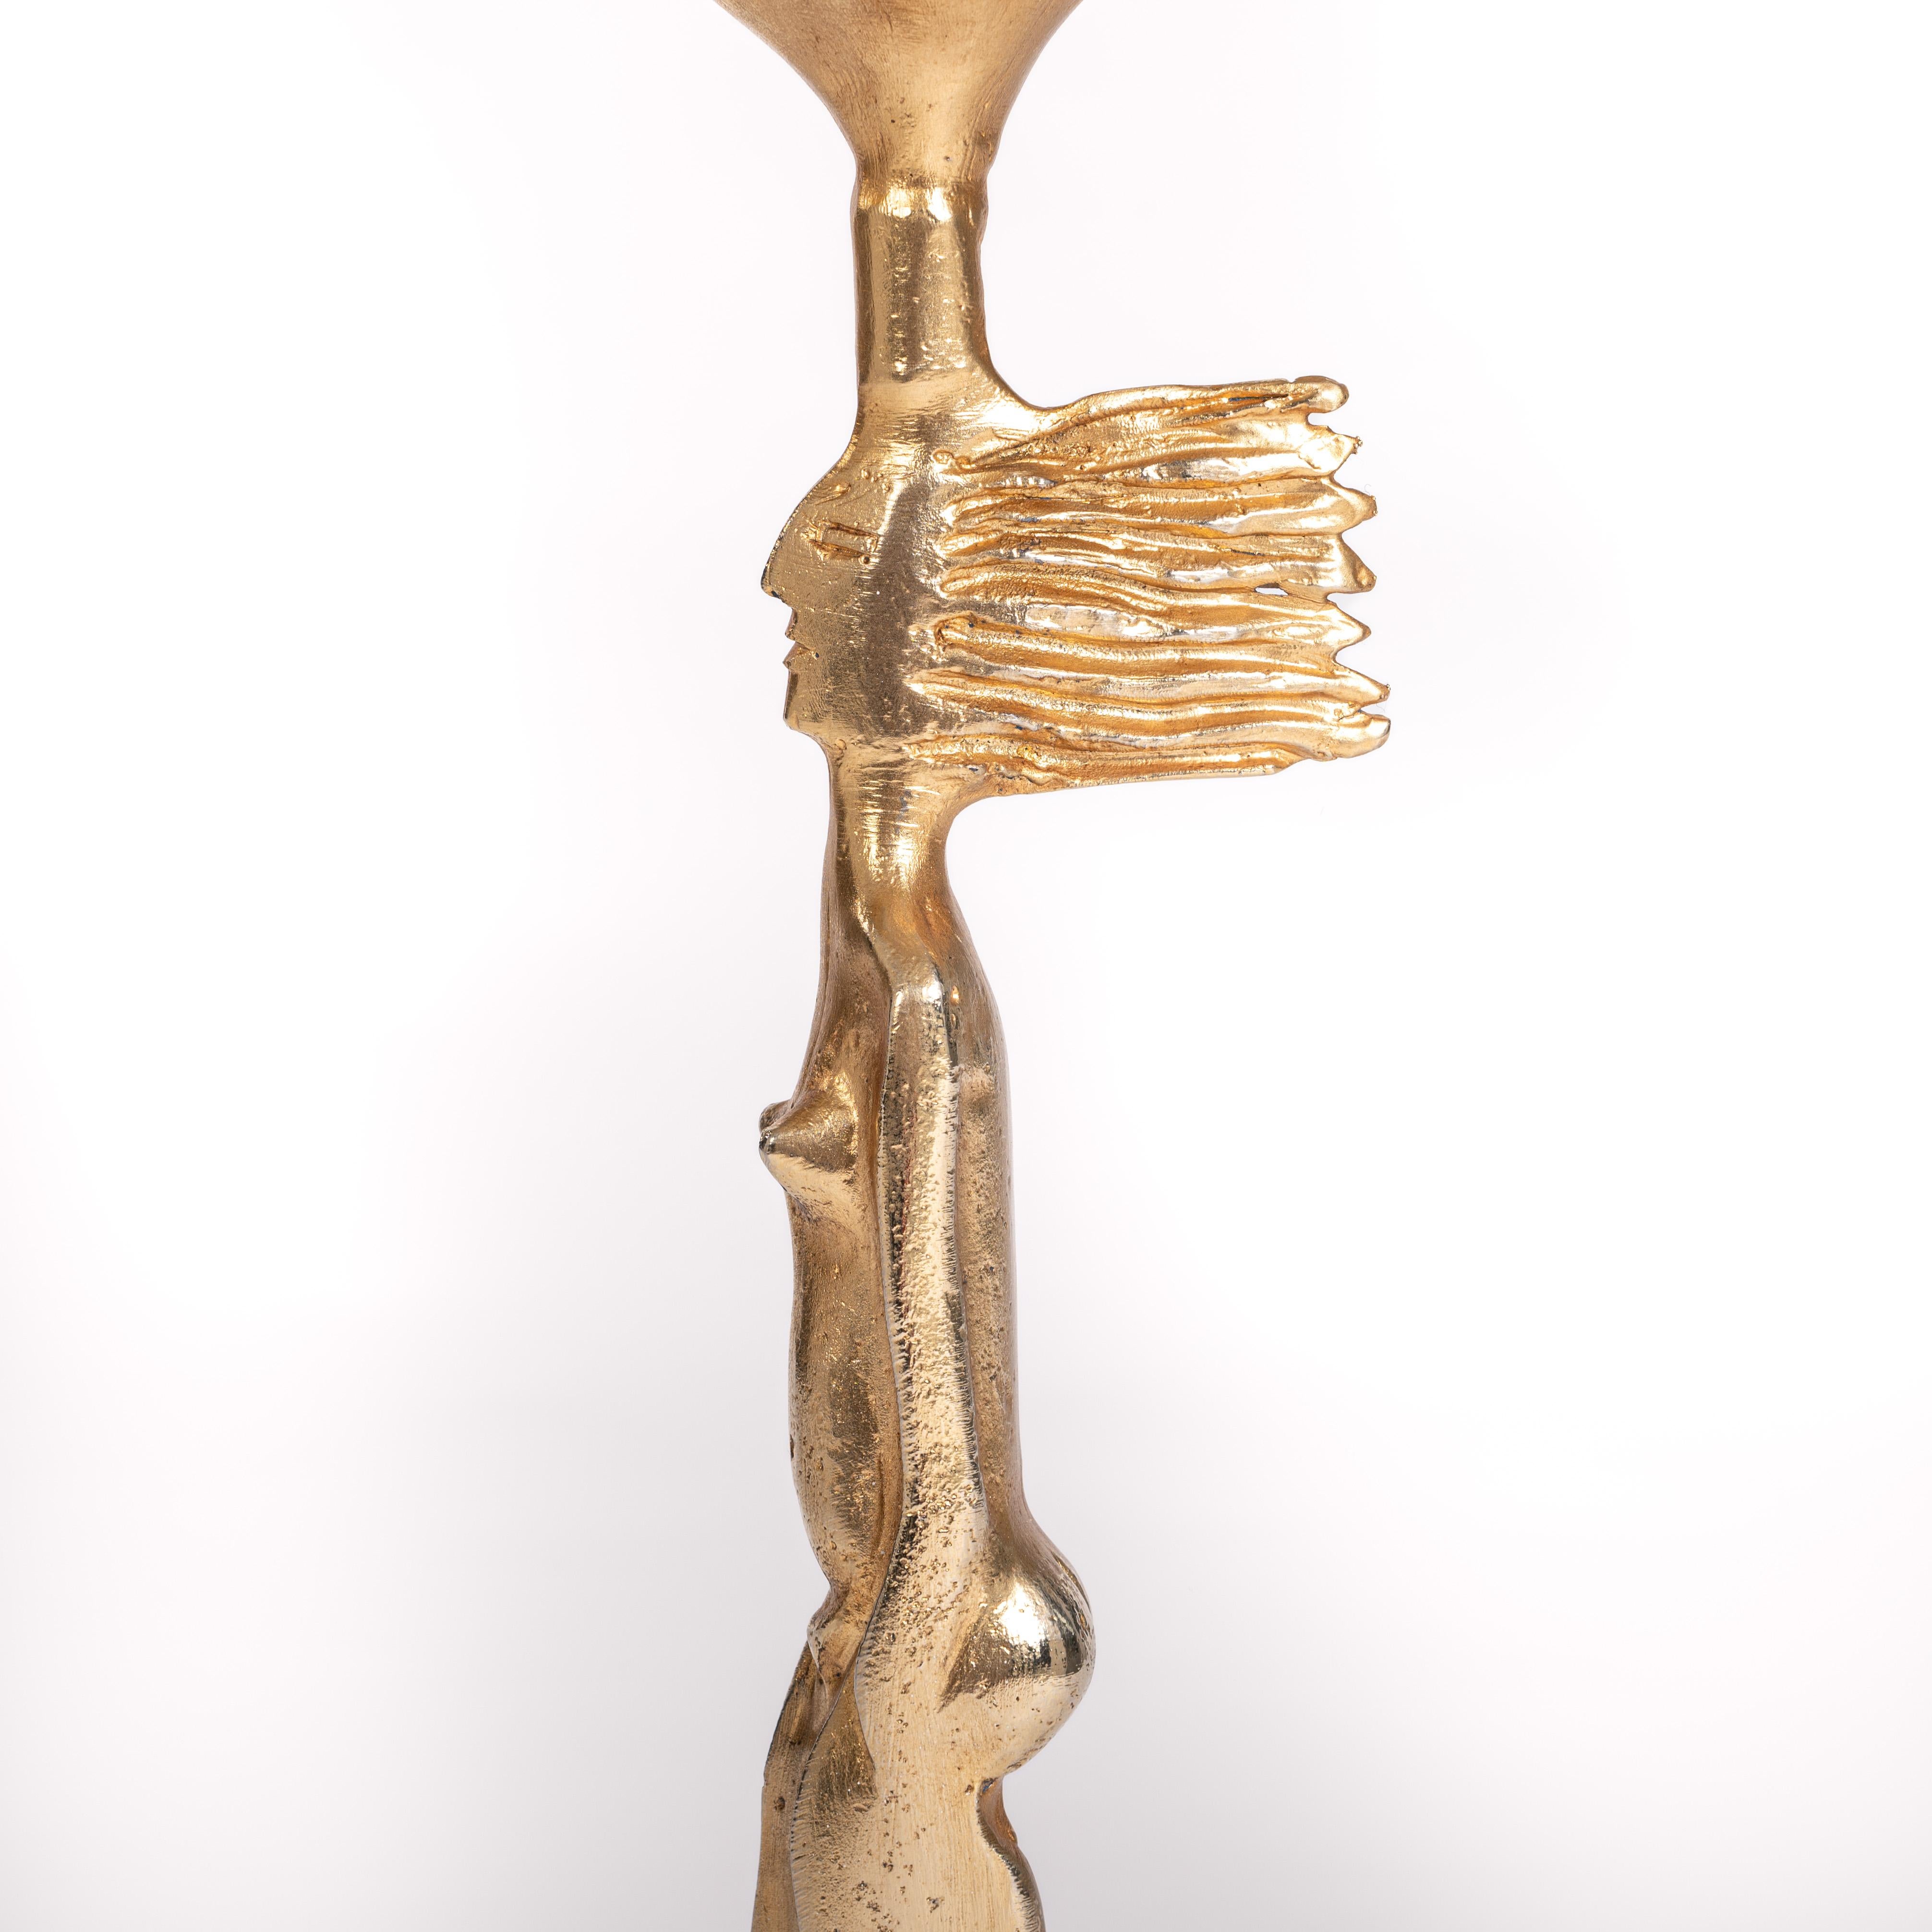 Cast French Gilded Bronze Table Lamp by Pierre Casenove for Fondica, 1980s For Sale